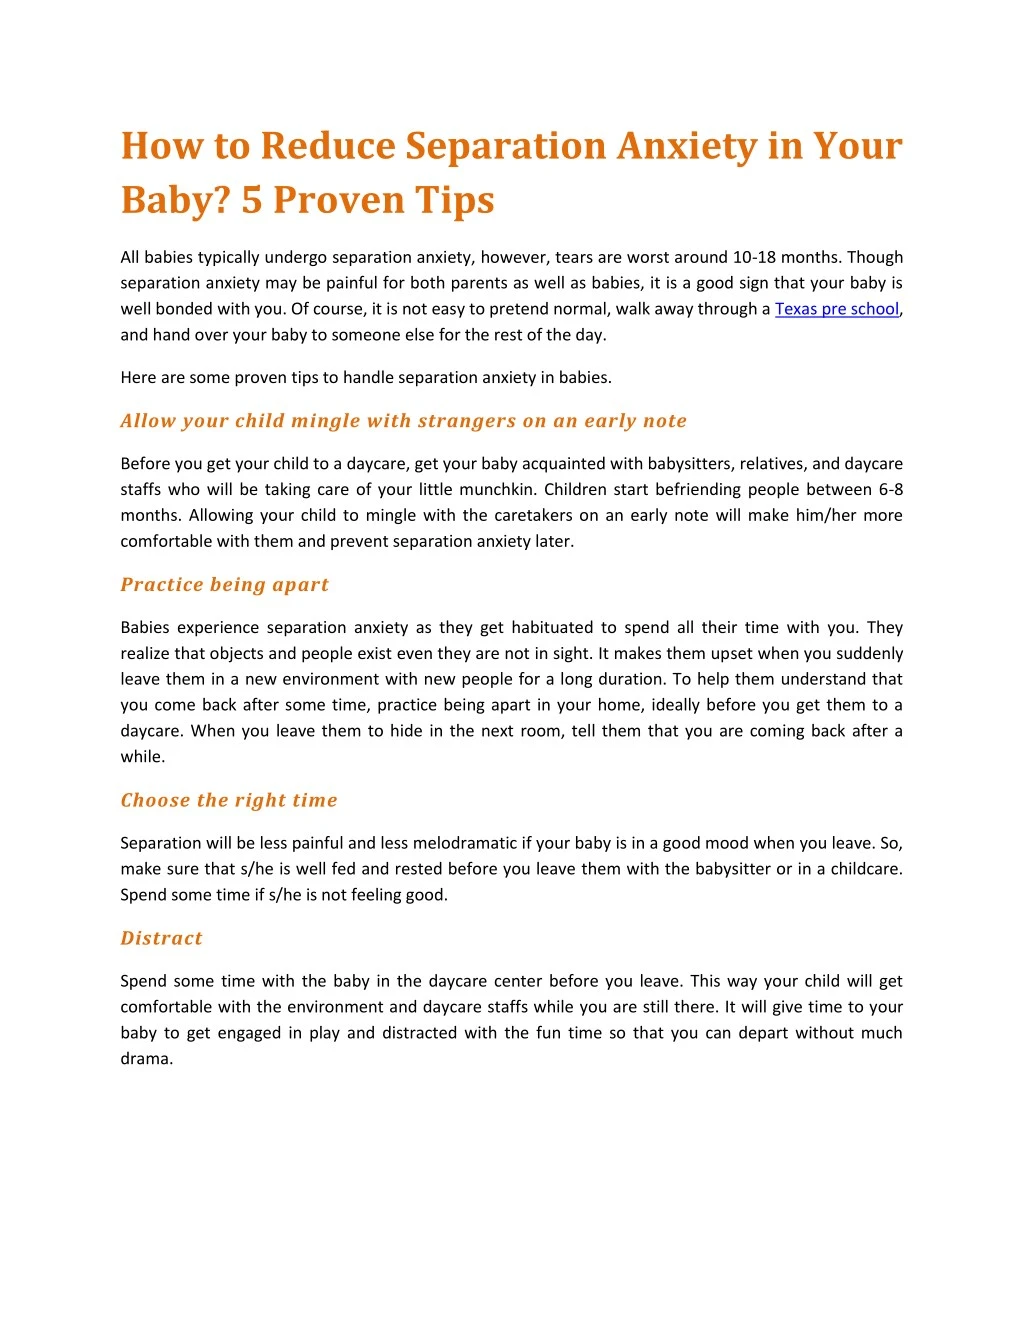 how to reduce separation anxiety in your baby